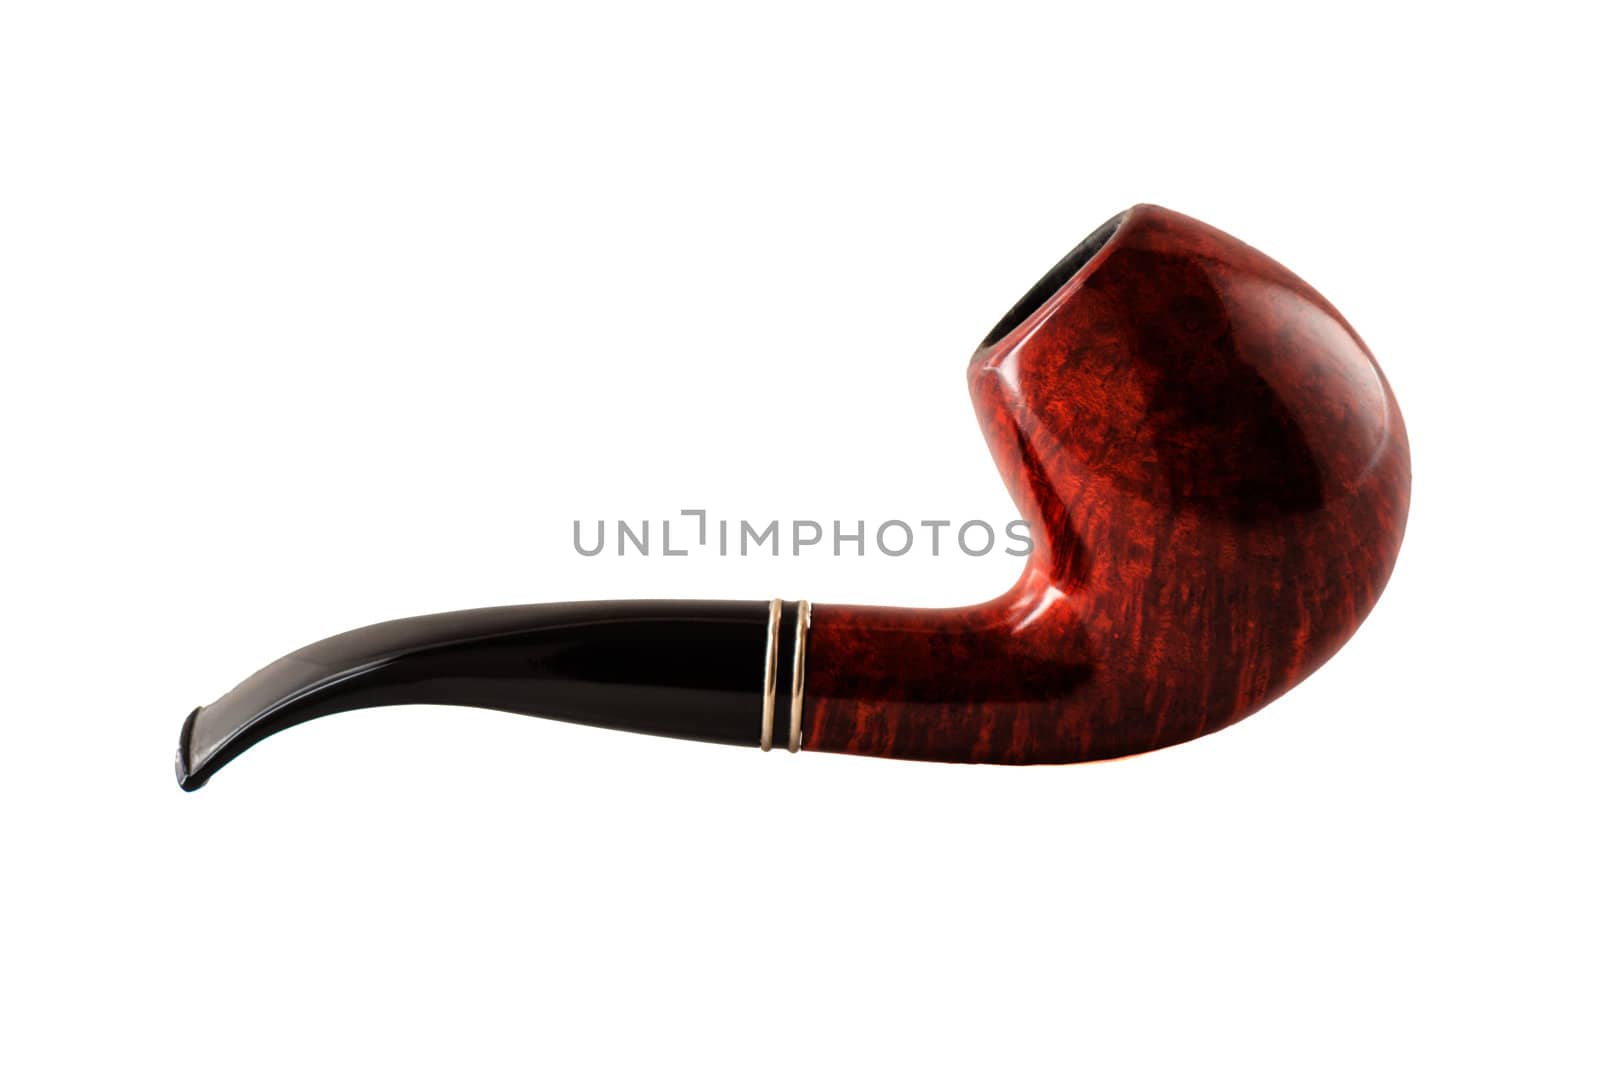 Retro tobacco pipe on a white background by dedron